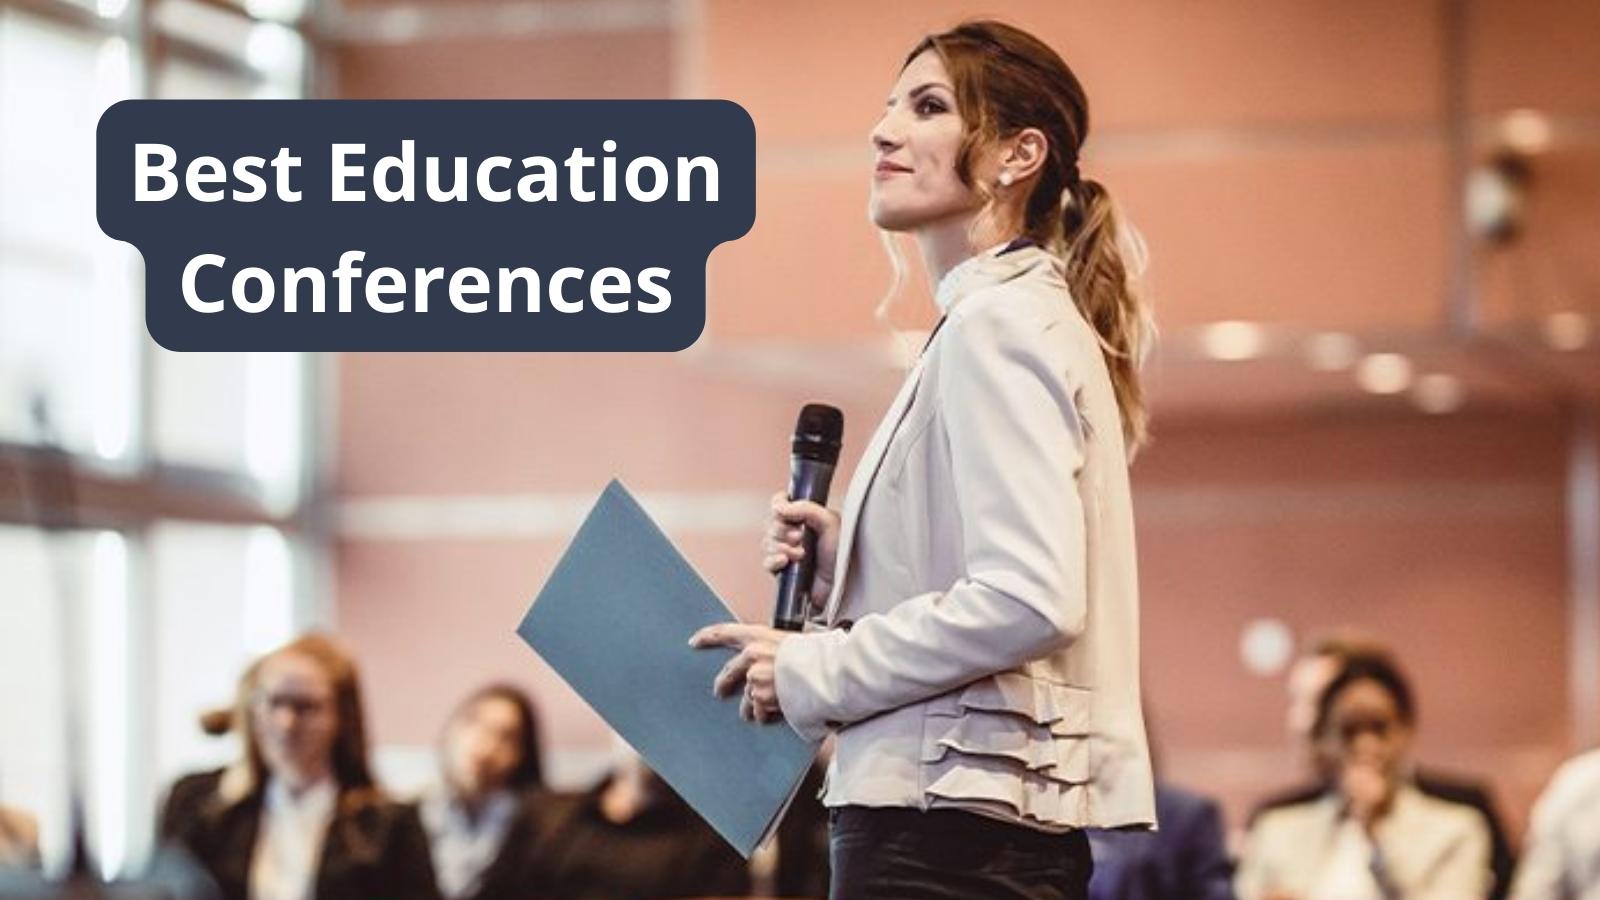 Best education conferences with a woman giving a presentation.